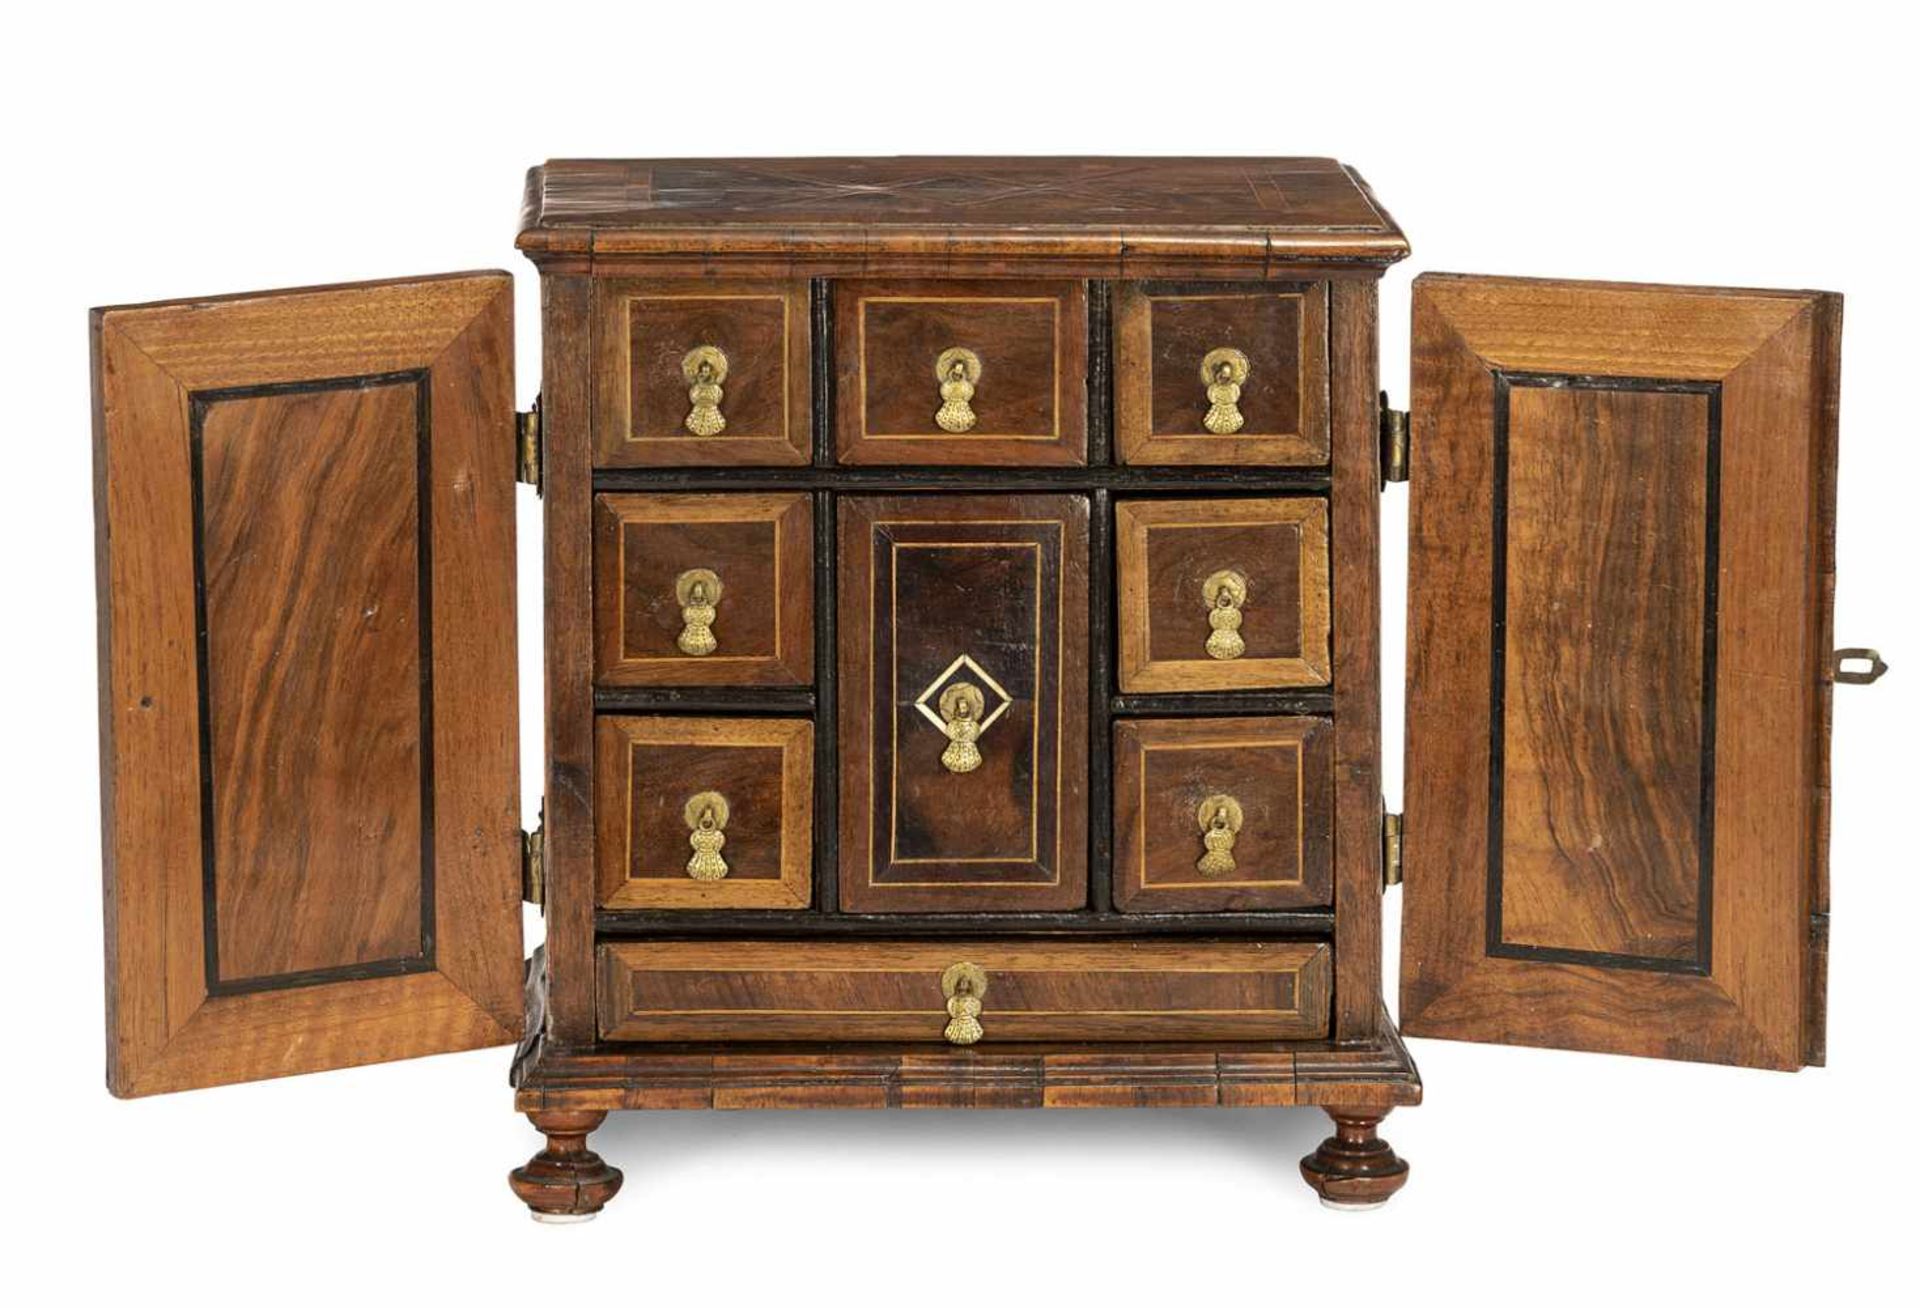 A Baroque brass mounted walnut and plum cabinet, Germany, 18th ct. Rest. Signs of aging. - Bild 3 aus 4